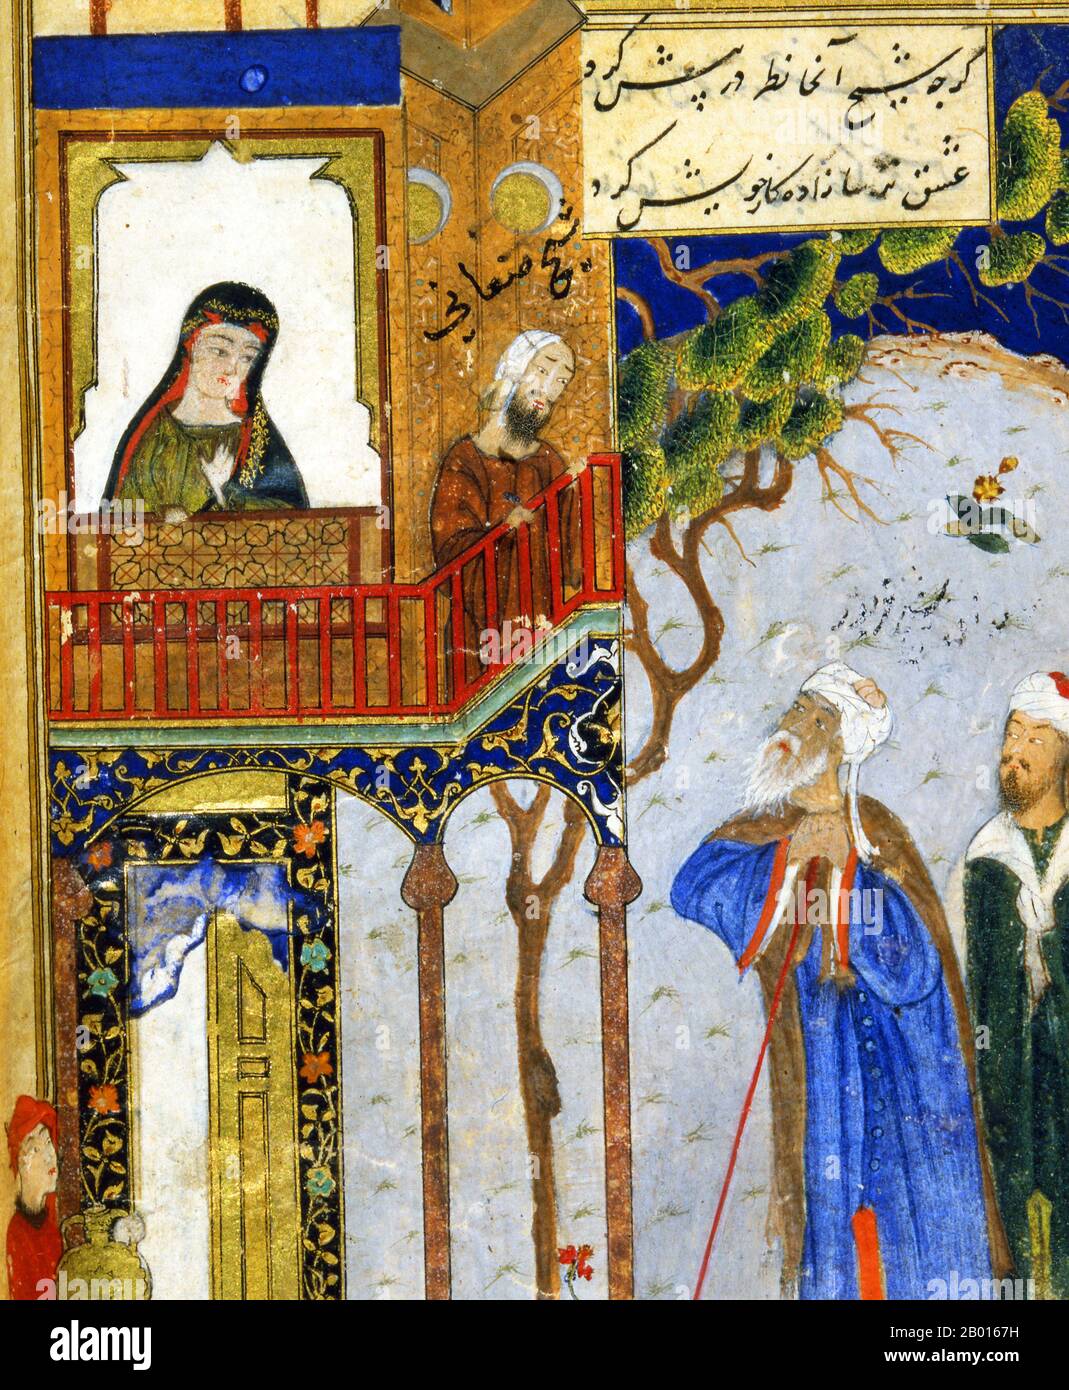 Iran: A miniature painting from 'Conference of the Birds' by Farid ud-Din Attar (1145-1221), 15th century.  'Conference of the Birds' ('Mantiq-ut-Tayr') is a Persian poem by Sufi poet Farid ud-Dun Attar. It is a frame story whose central figure, a hoopoe, is a kind of spiritual leader for a number of other birds. This miniature is from one of the book’s anecdotes about how the devout Arab Shaykh Sanan falls in love with a Christian maiden from Rum (Byzantium). Stock Photo